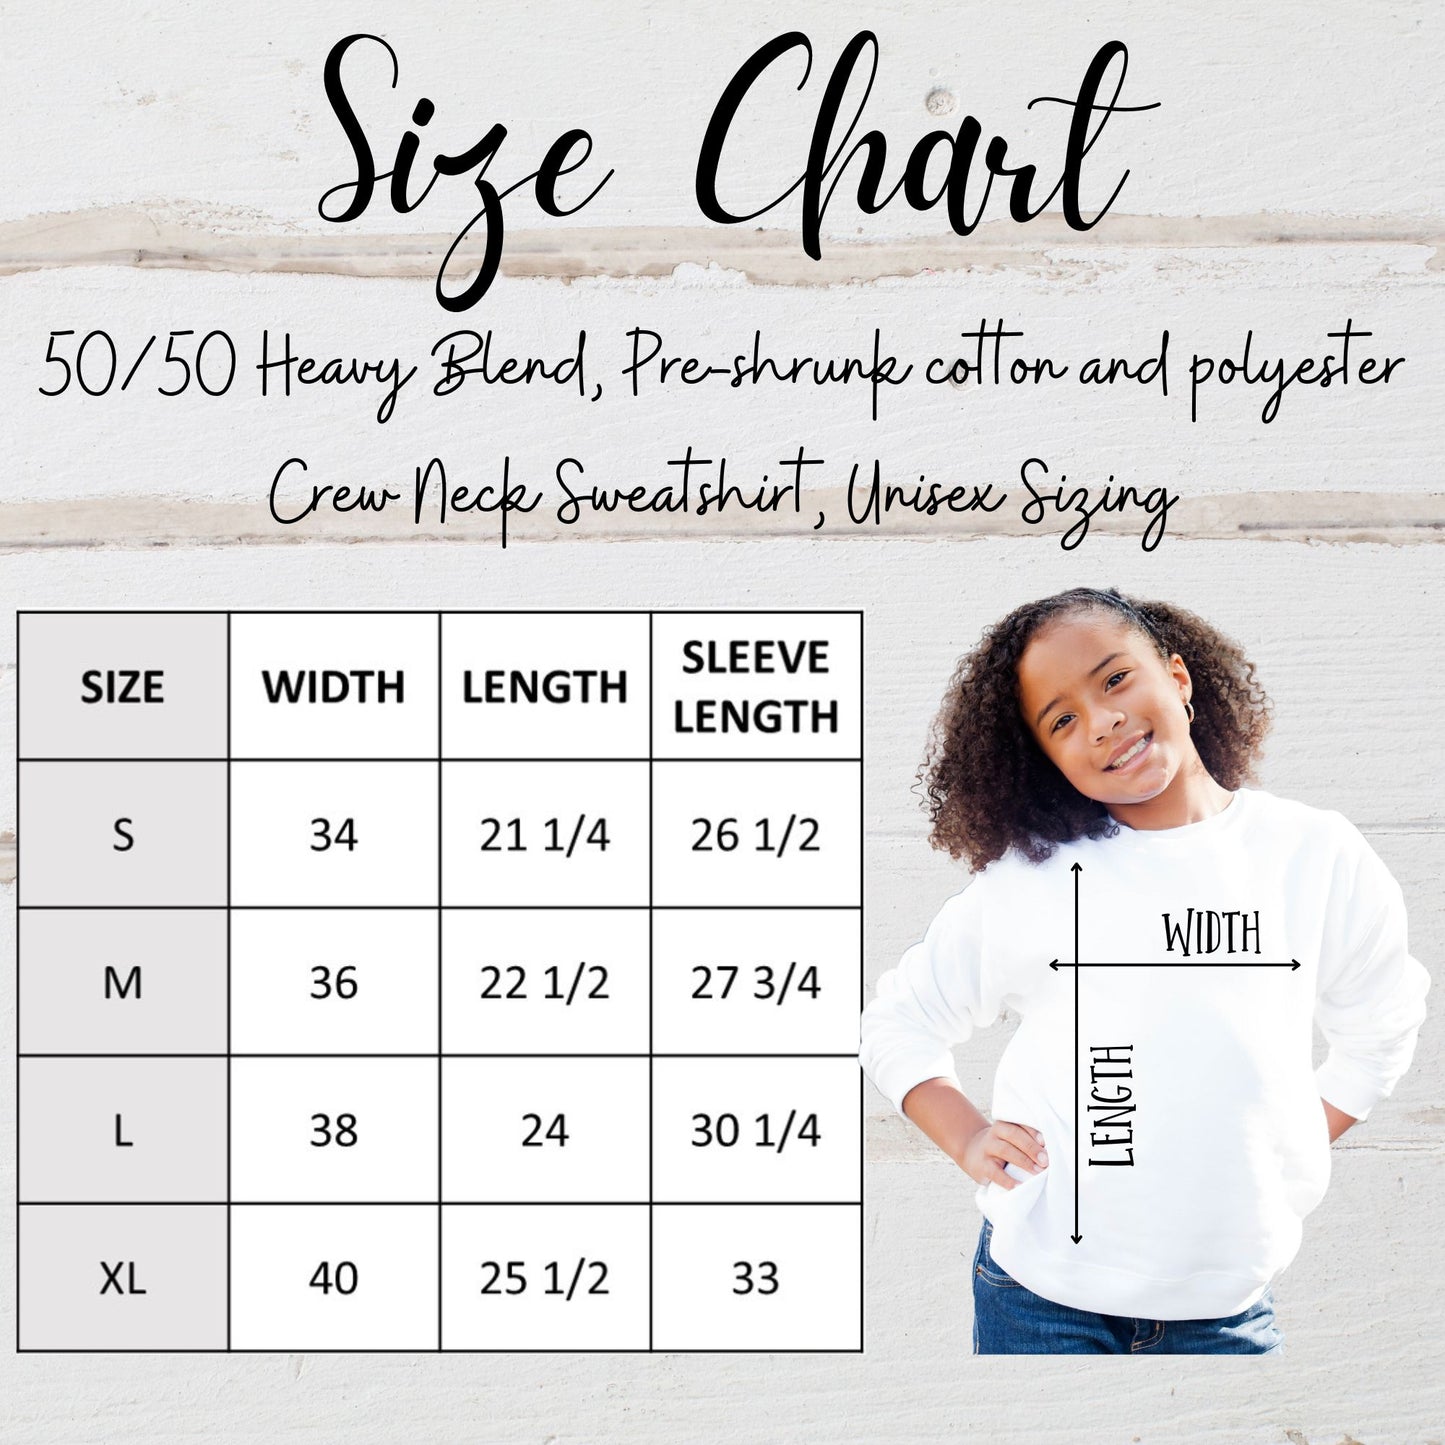 the size chart for a girl's sweatshirt